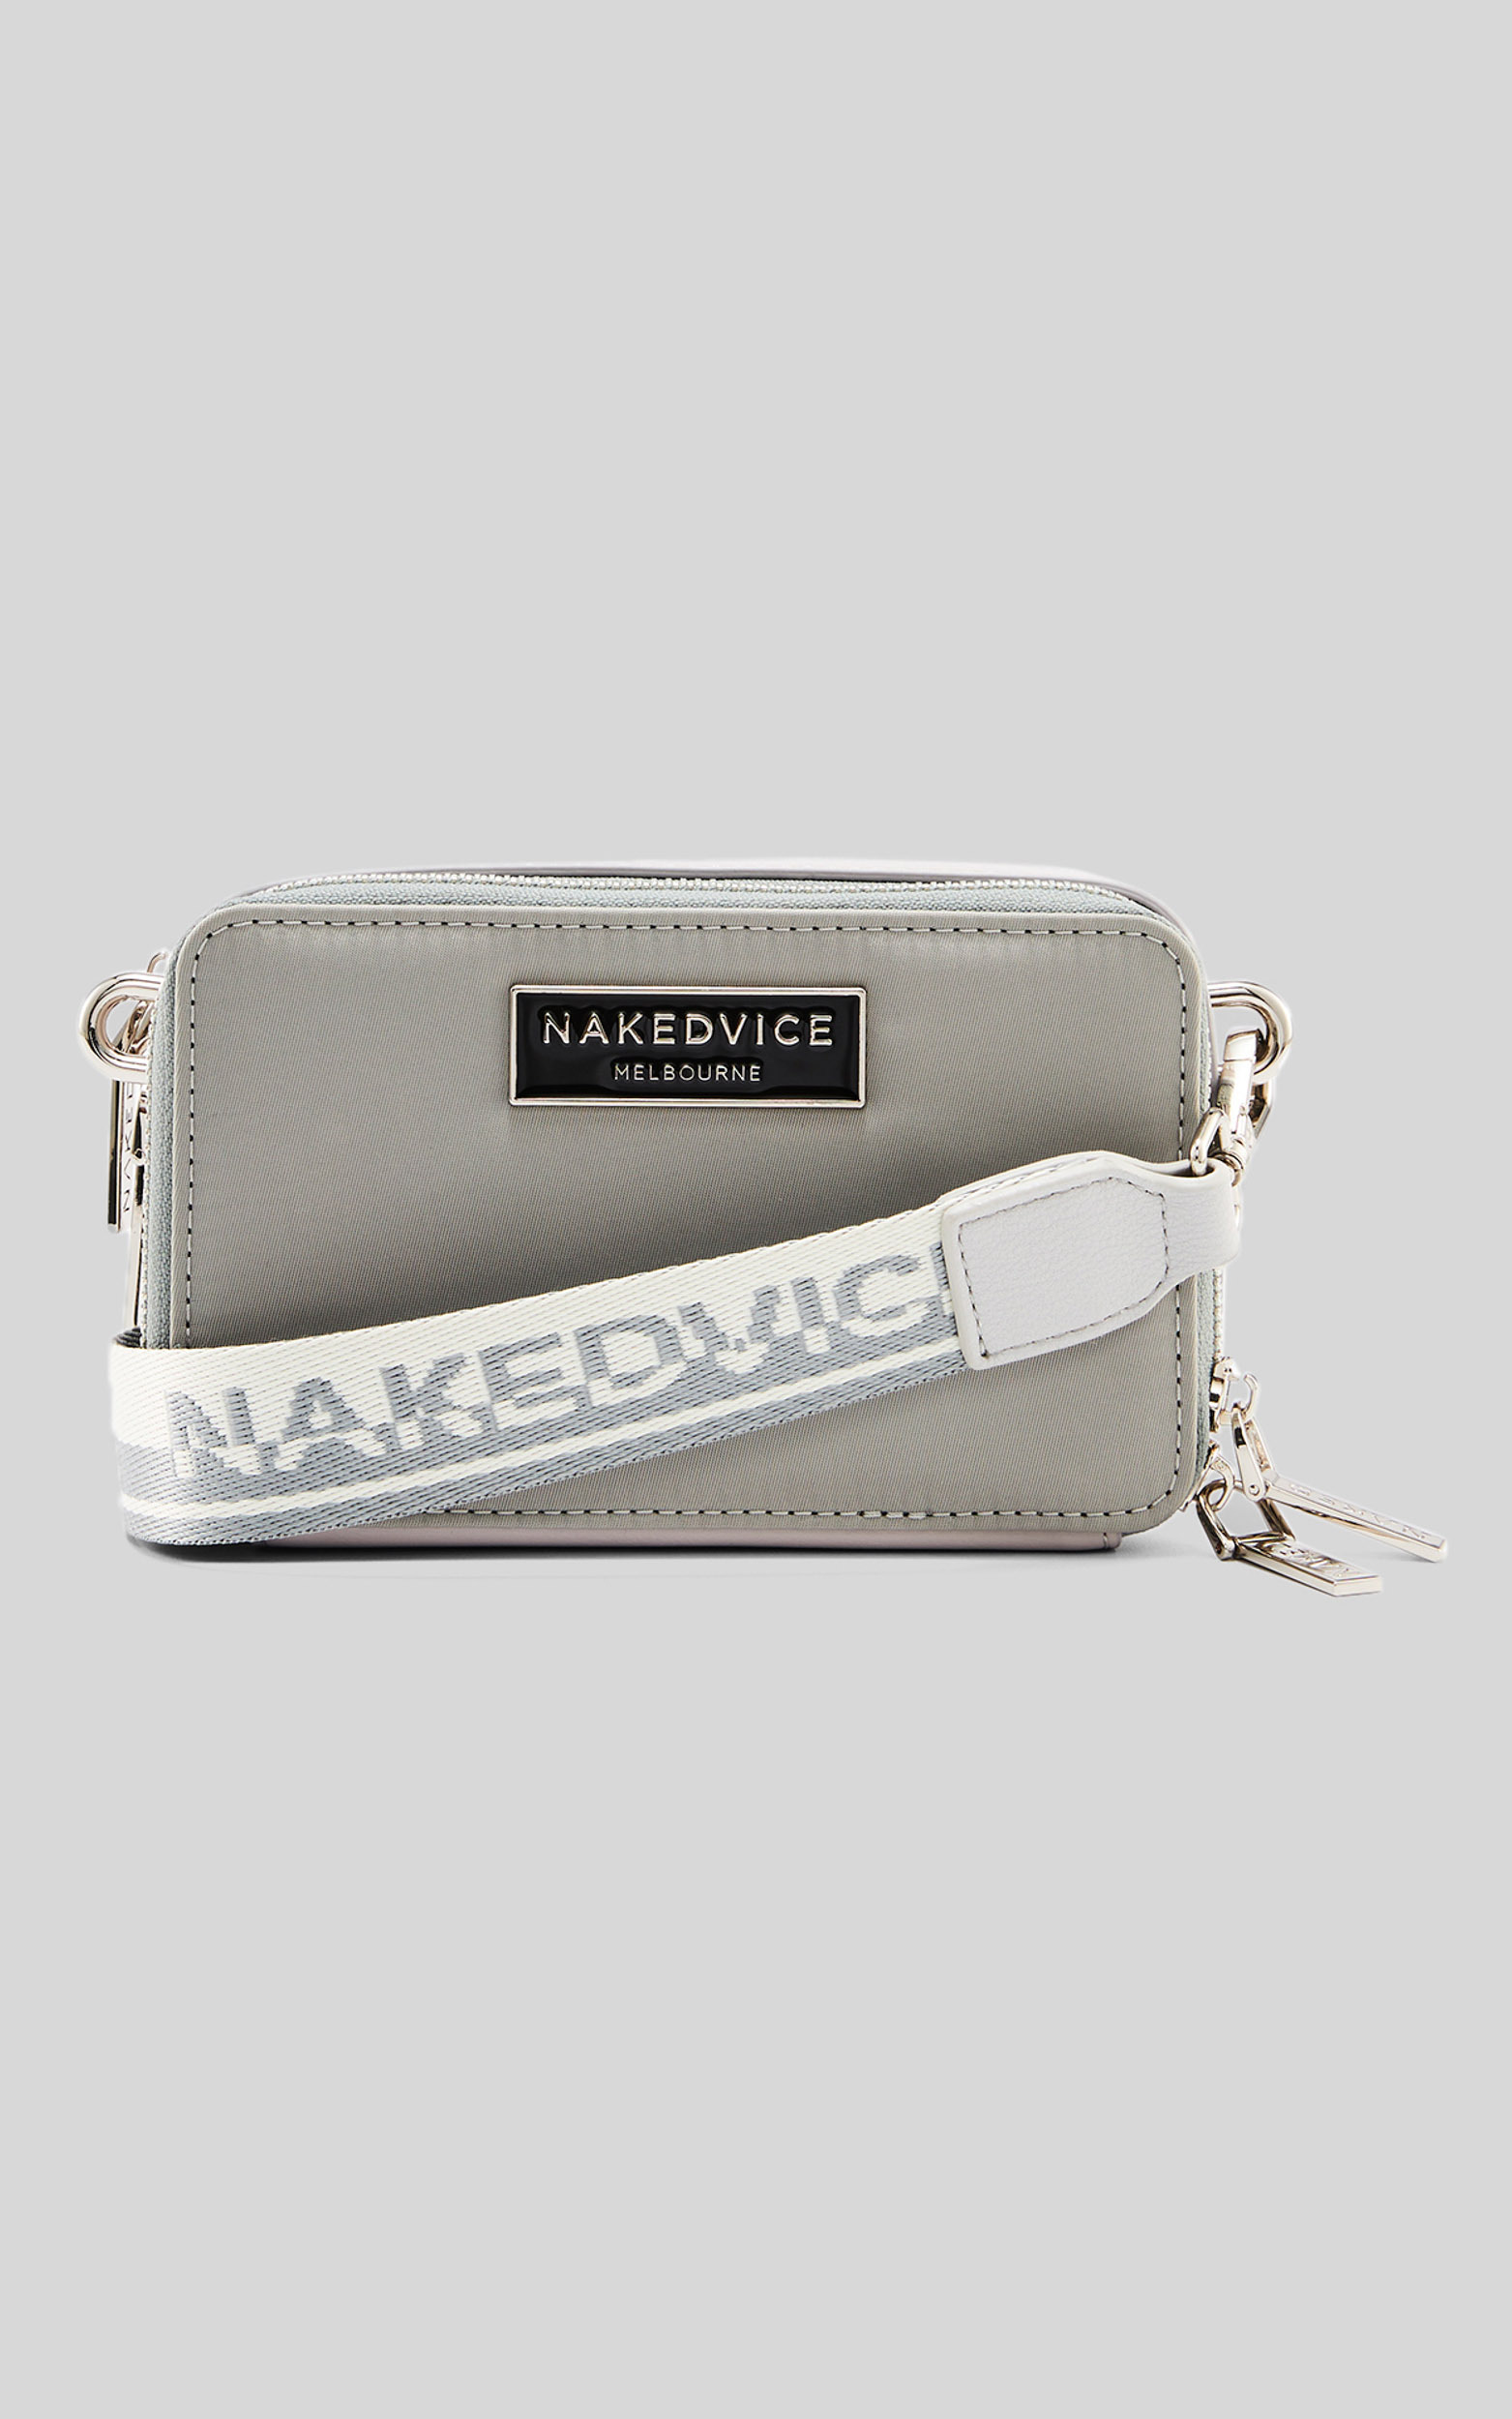 Nakedvice - The Lexie Kia Bag in Steel - NoSize, SLV1, hi-res image number null